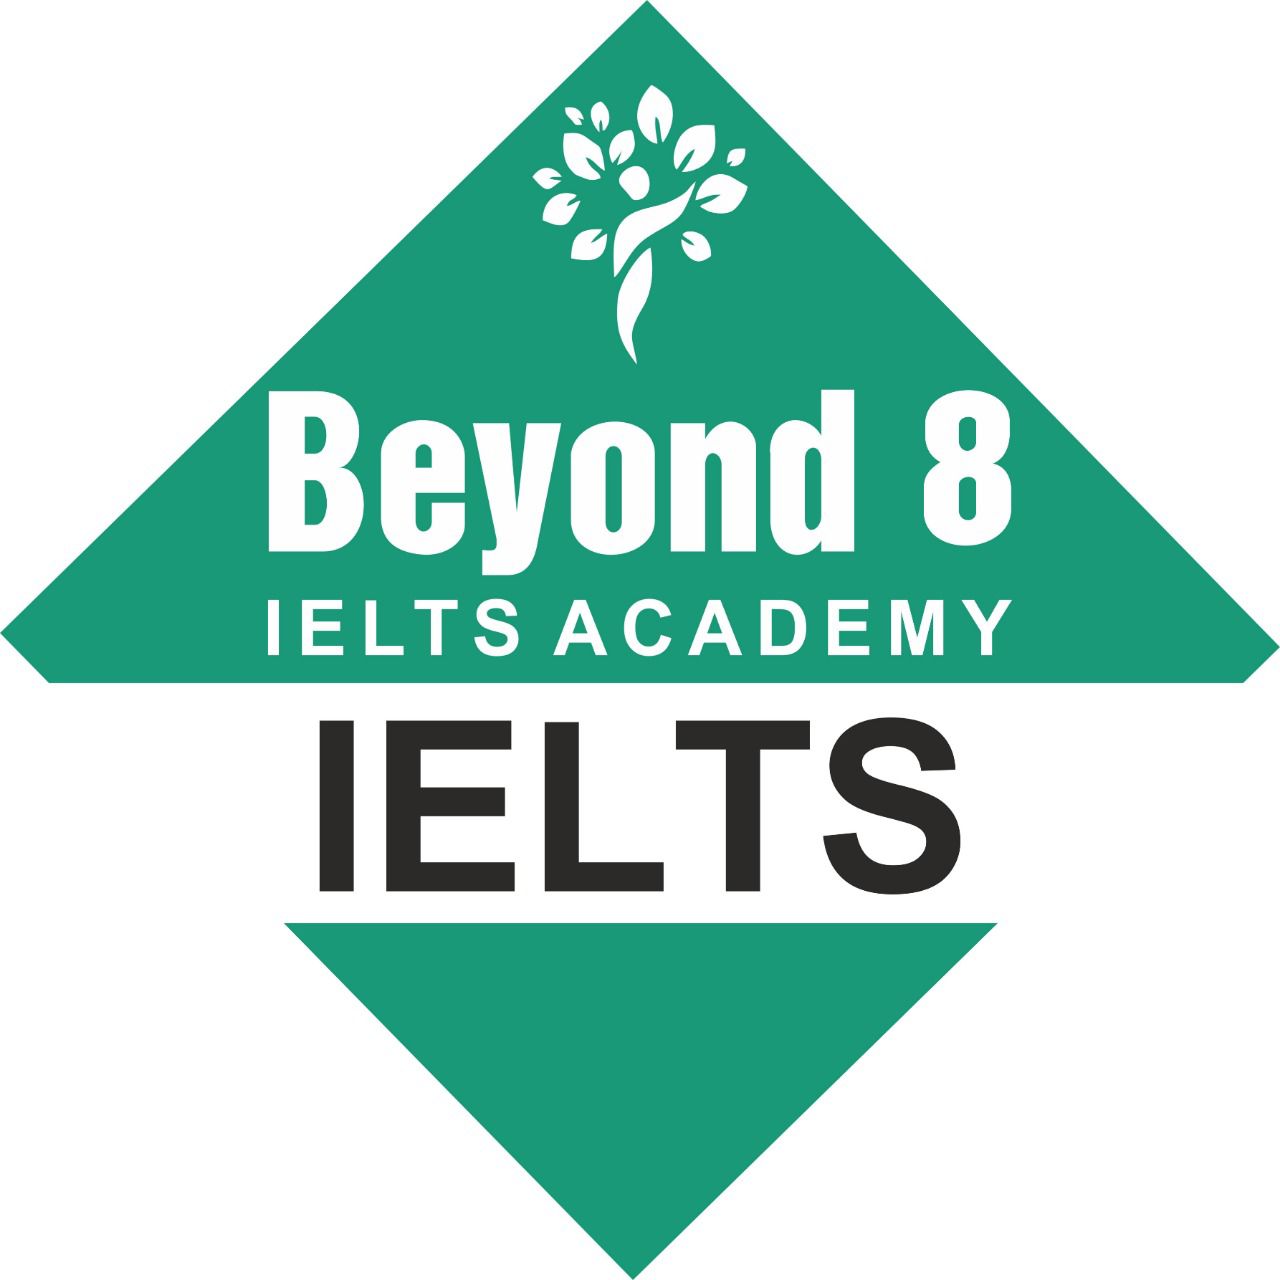 Beyond 8 IELTS & PTE ACADEMY – Dial Amritsar – Local Shops, Hotels